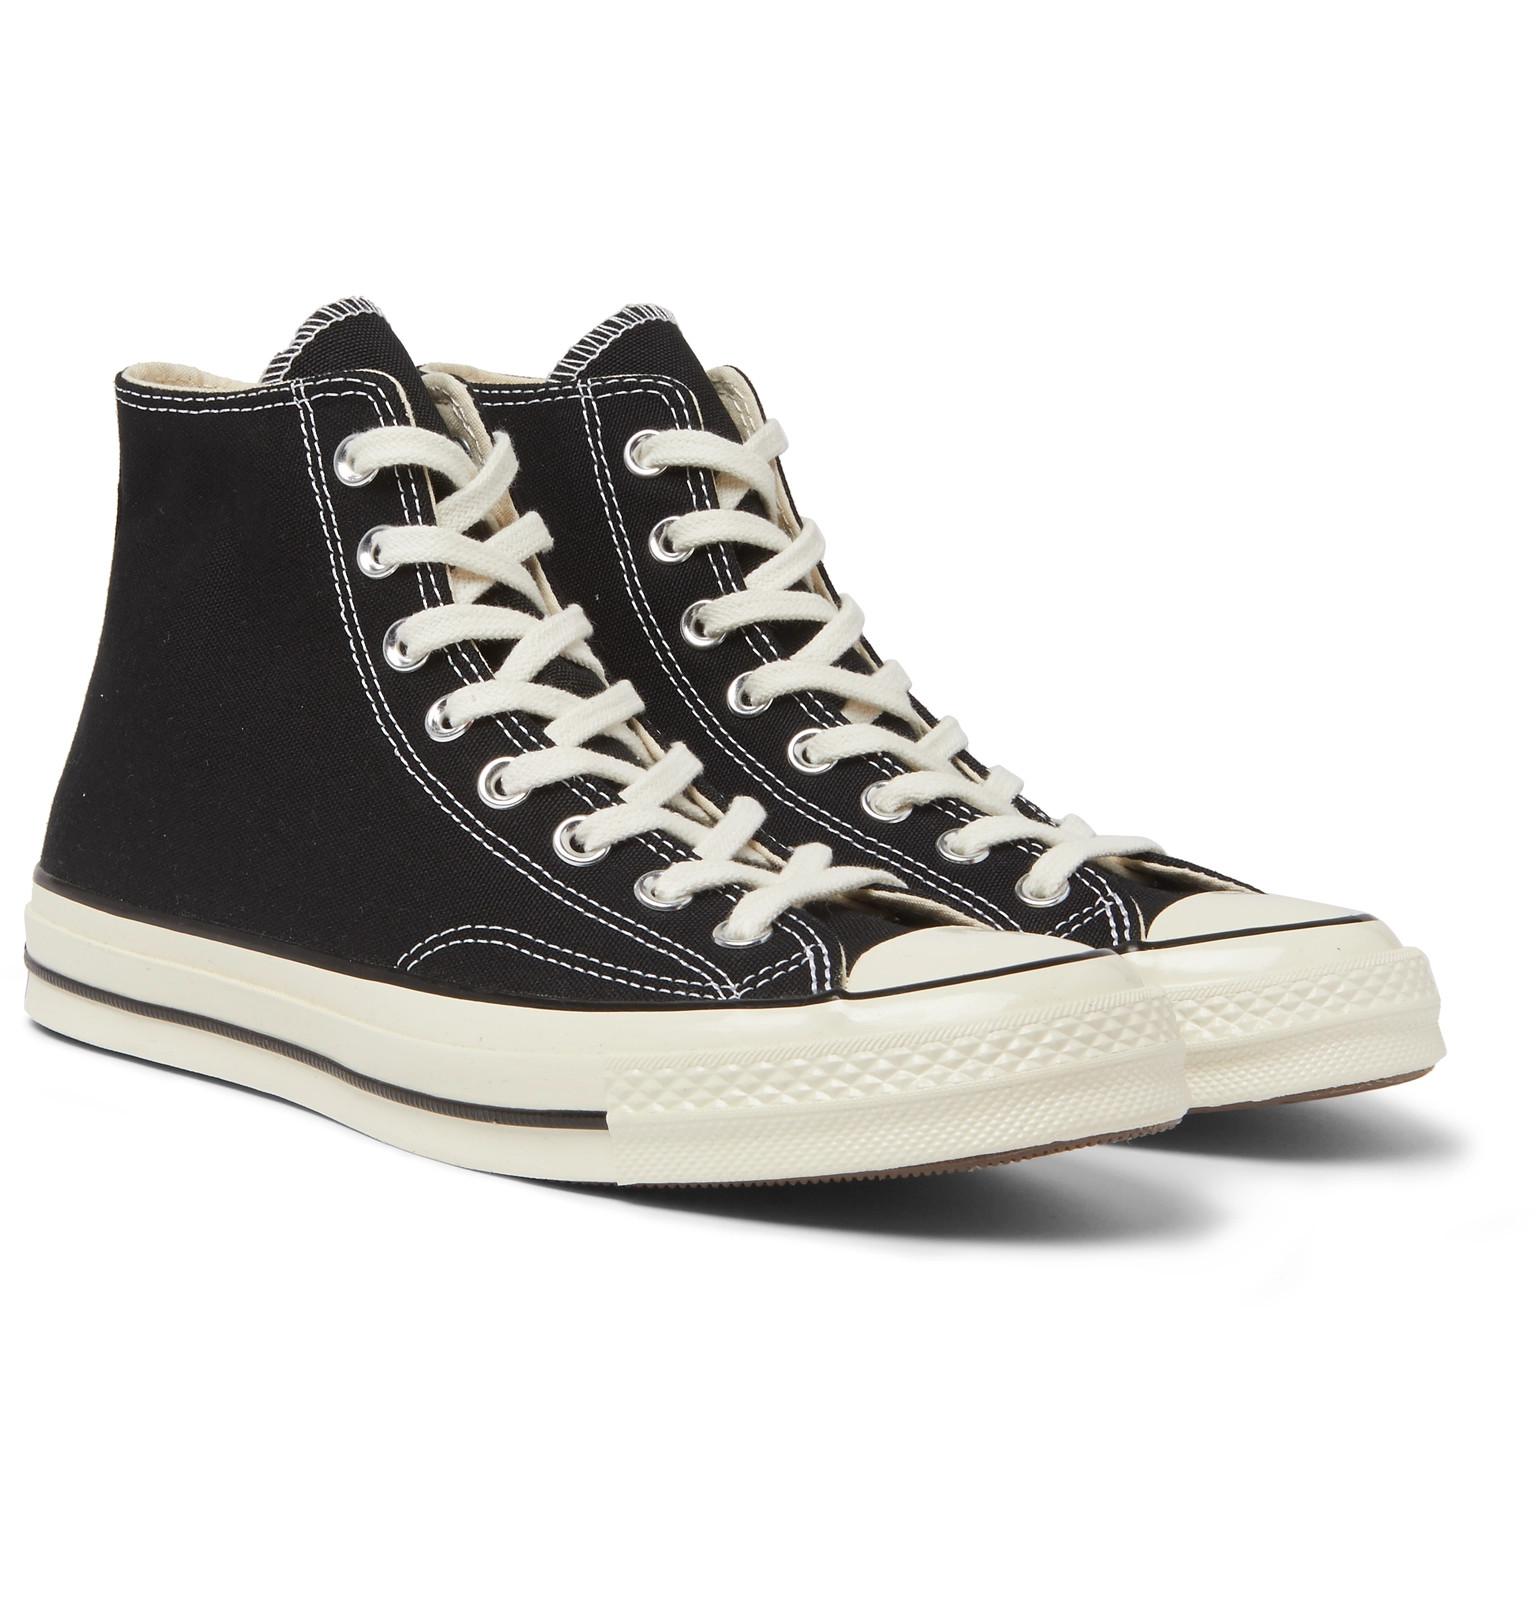 Converse Chuck 70 Canvas Hightop Sneakers in Black for